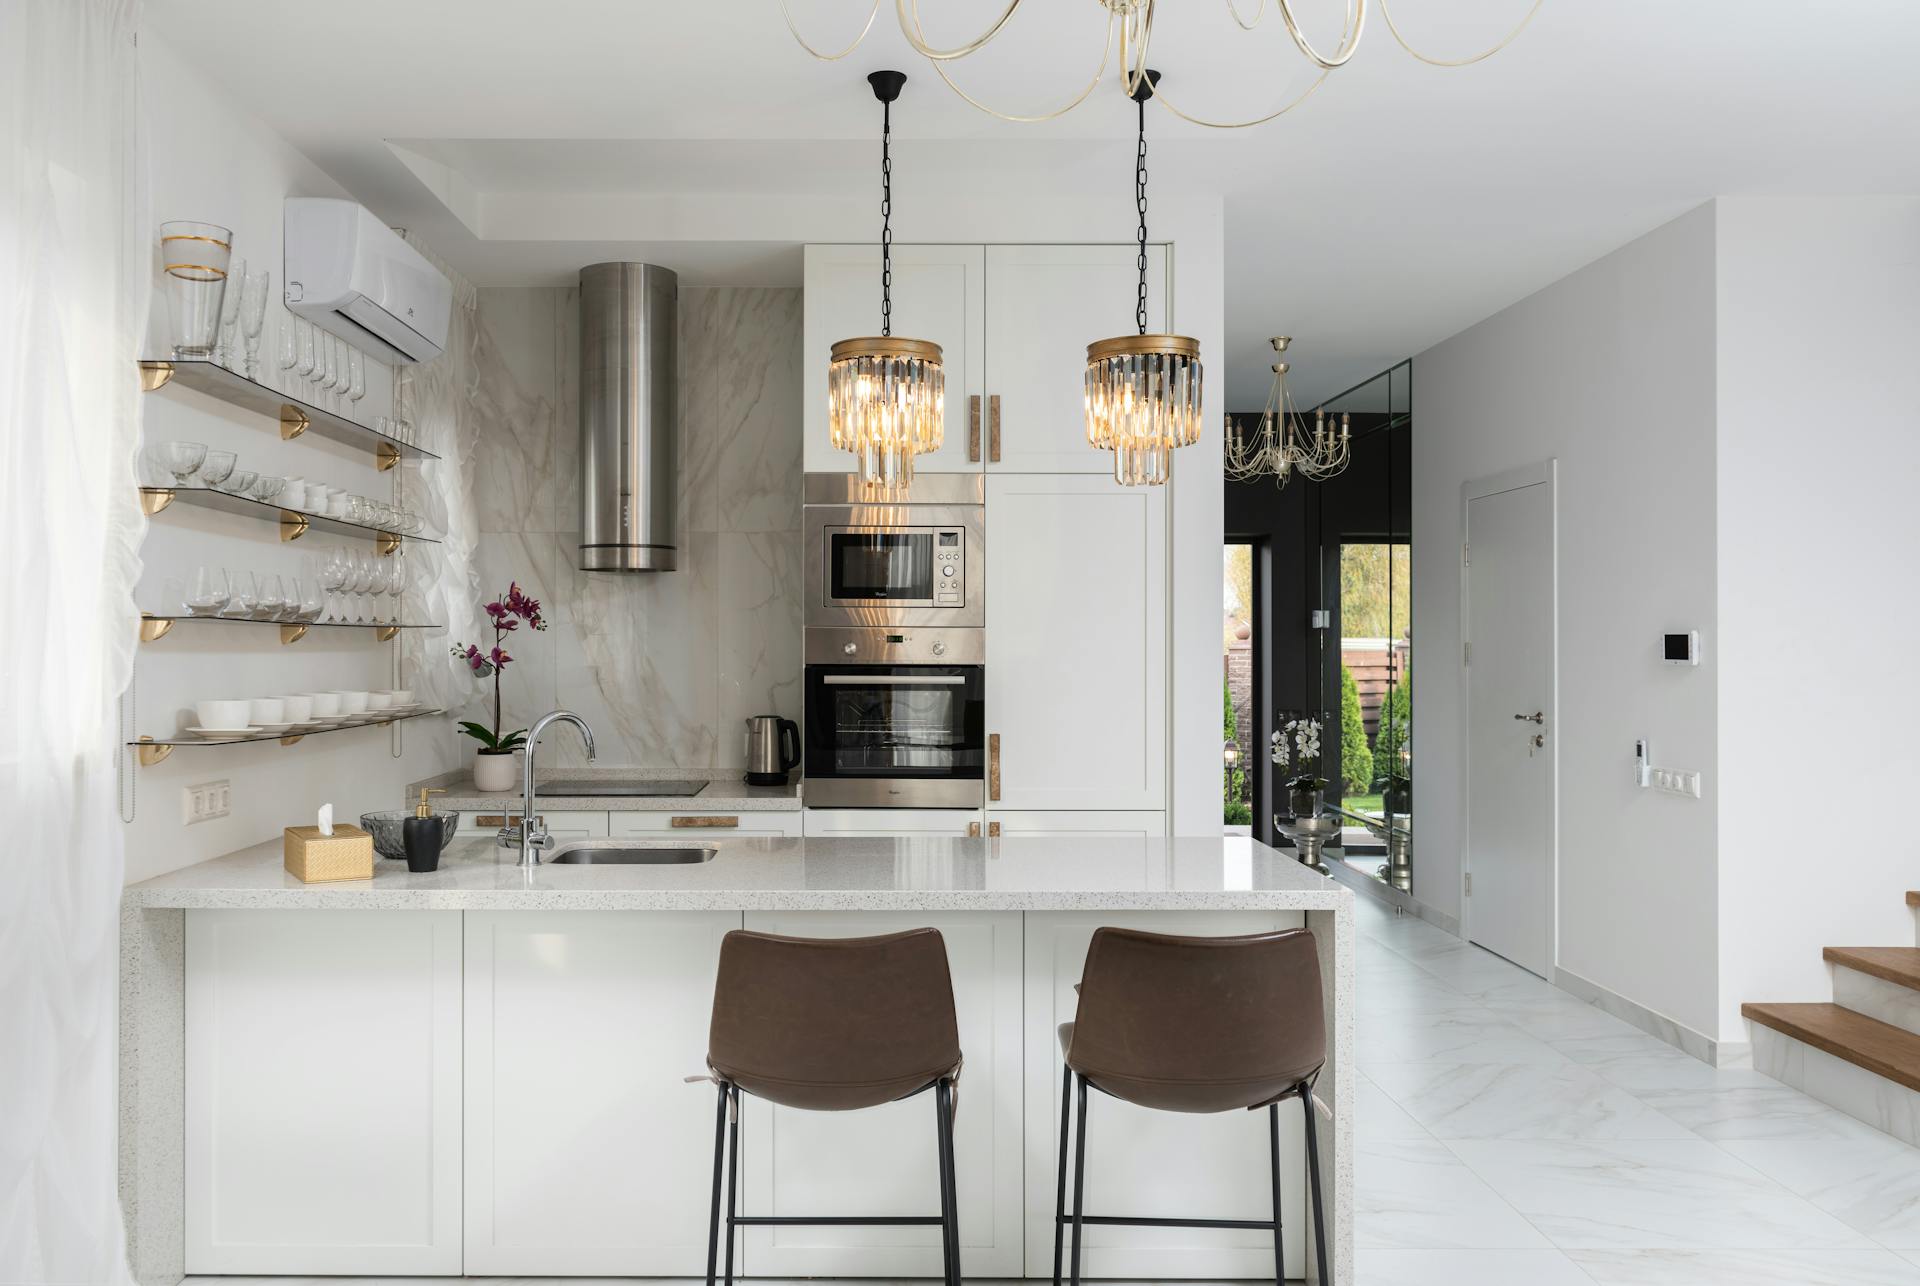 The interior of a modern kitchen | Source: Pexels